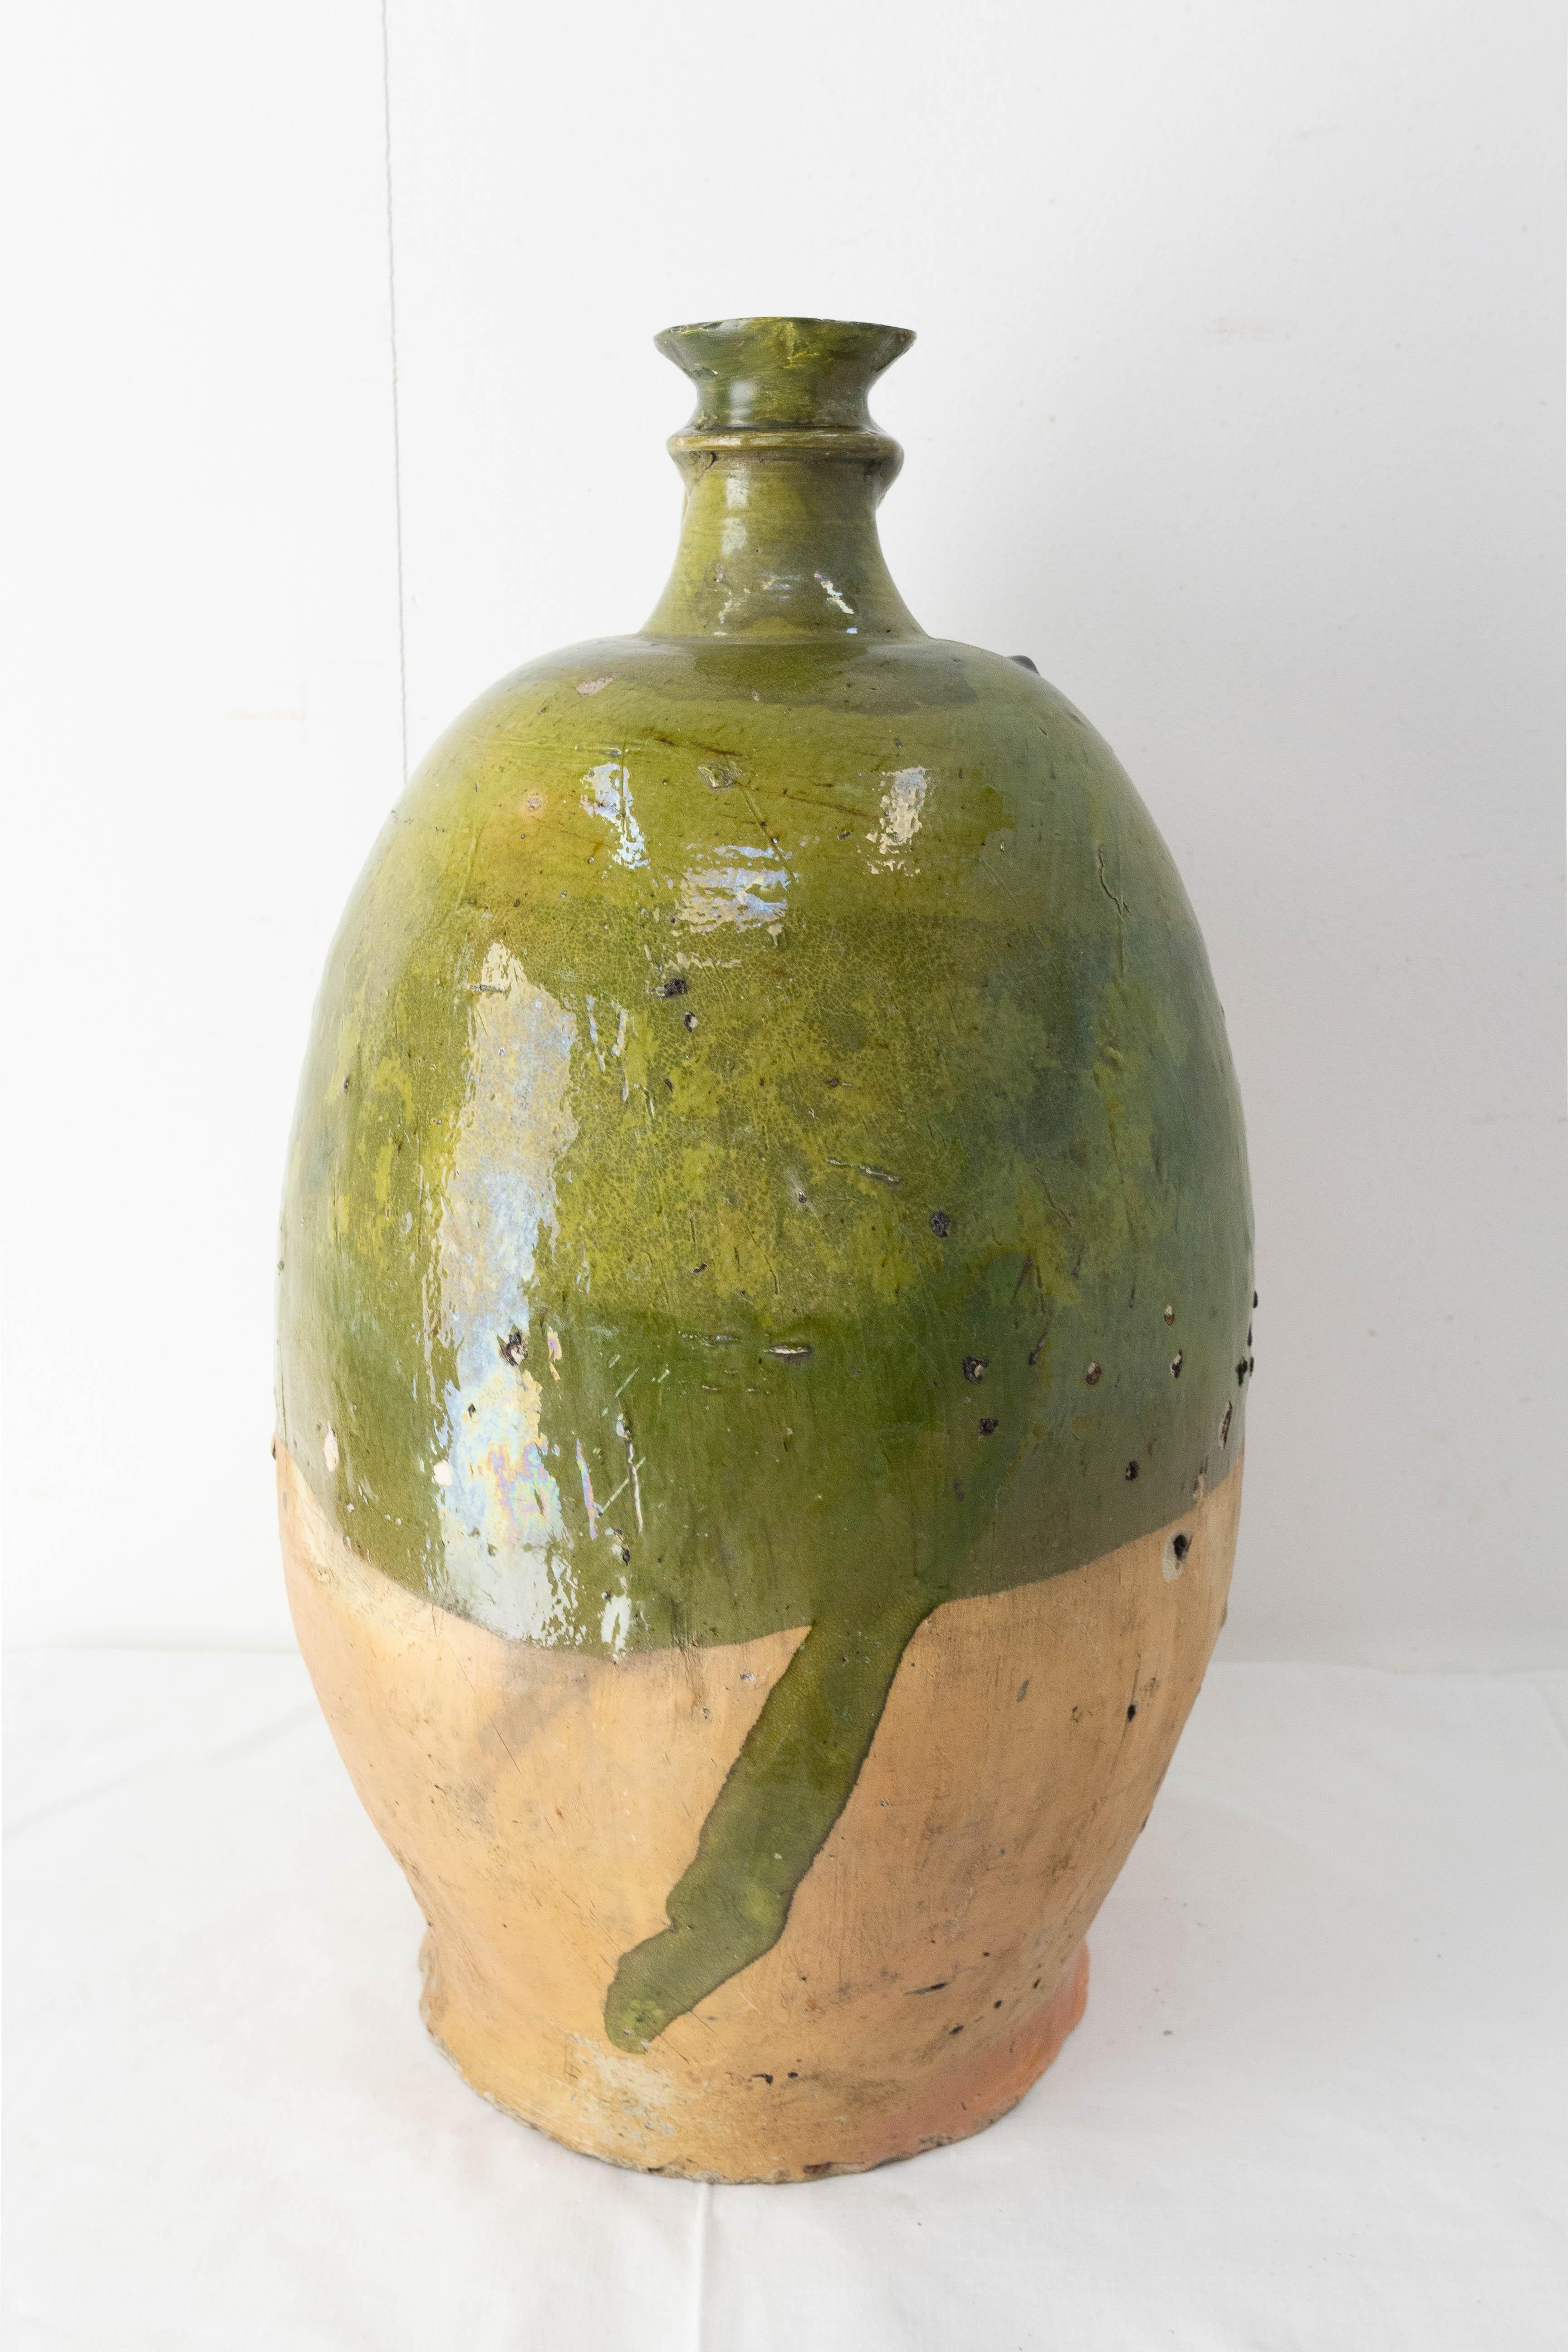 French Provincial South of France Provencal Oil Jar Terracotta with Green Glaze, 19th Century For Sale